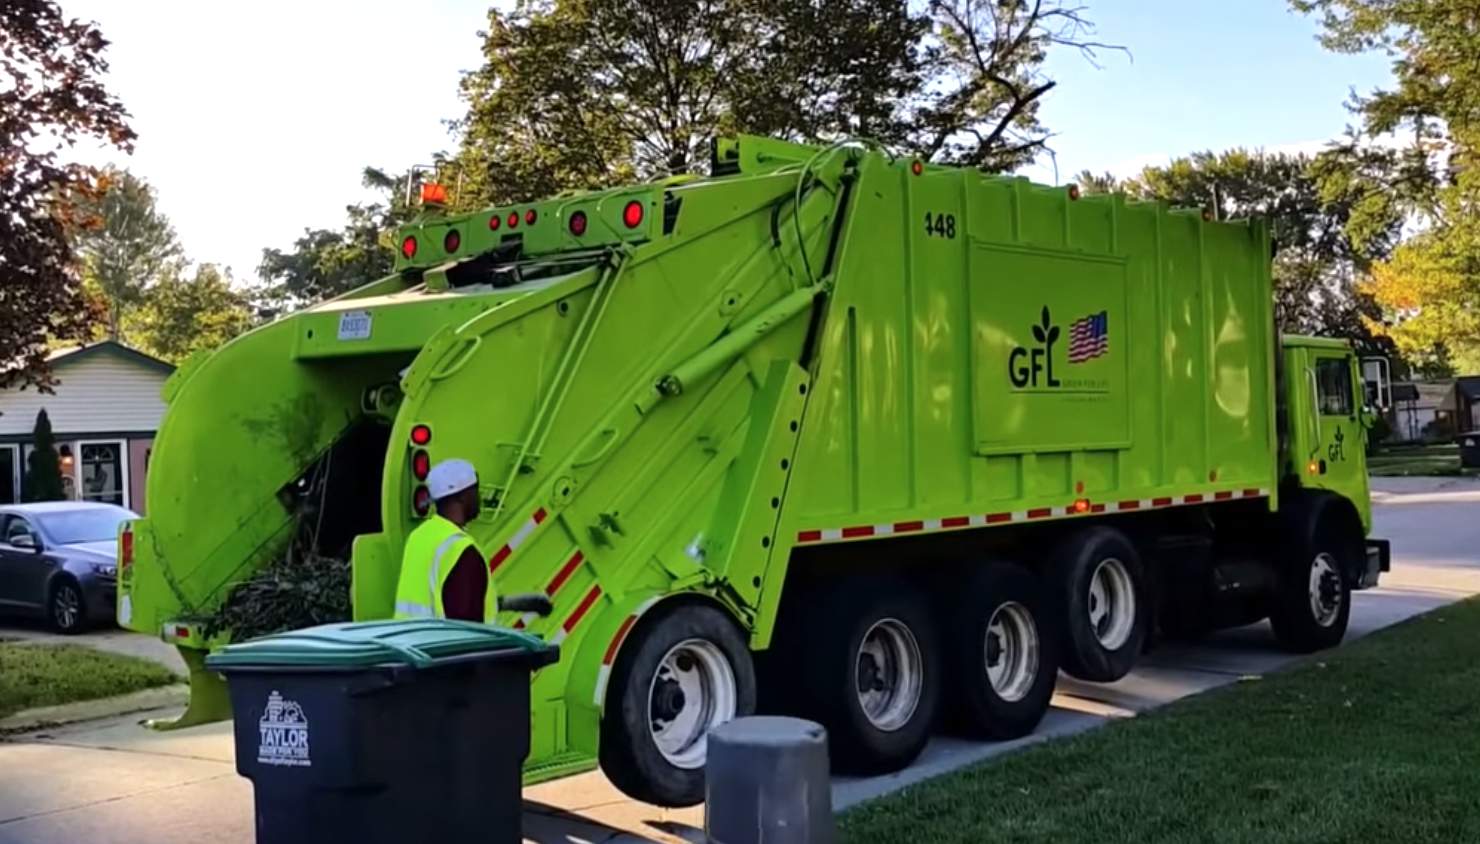 GFL is suspending all yard waste collection amid COVID19 pandemic